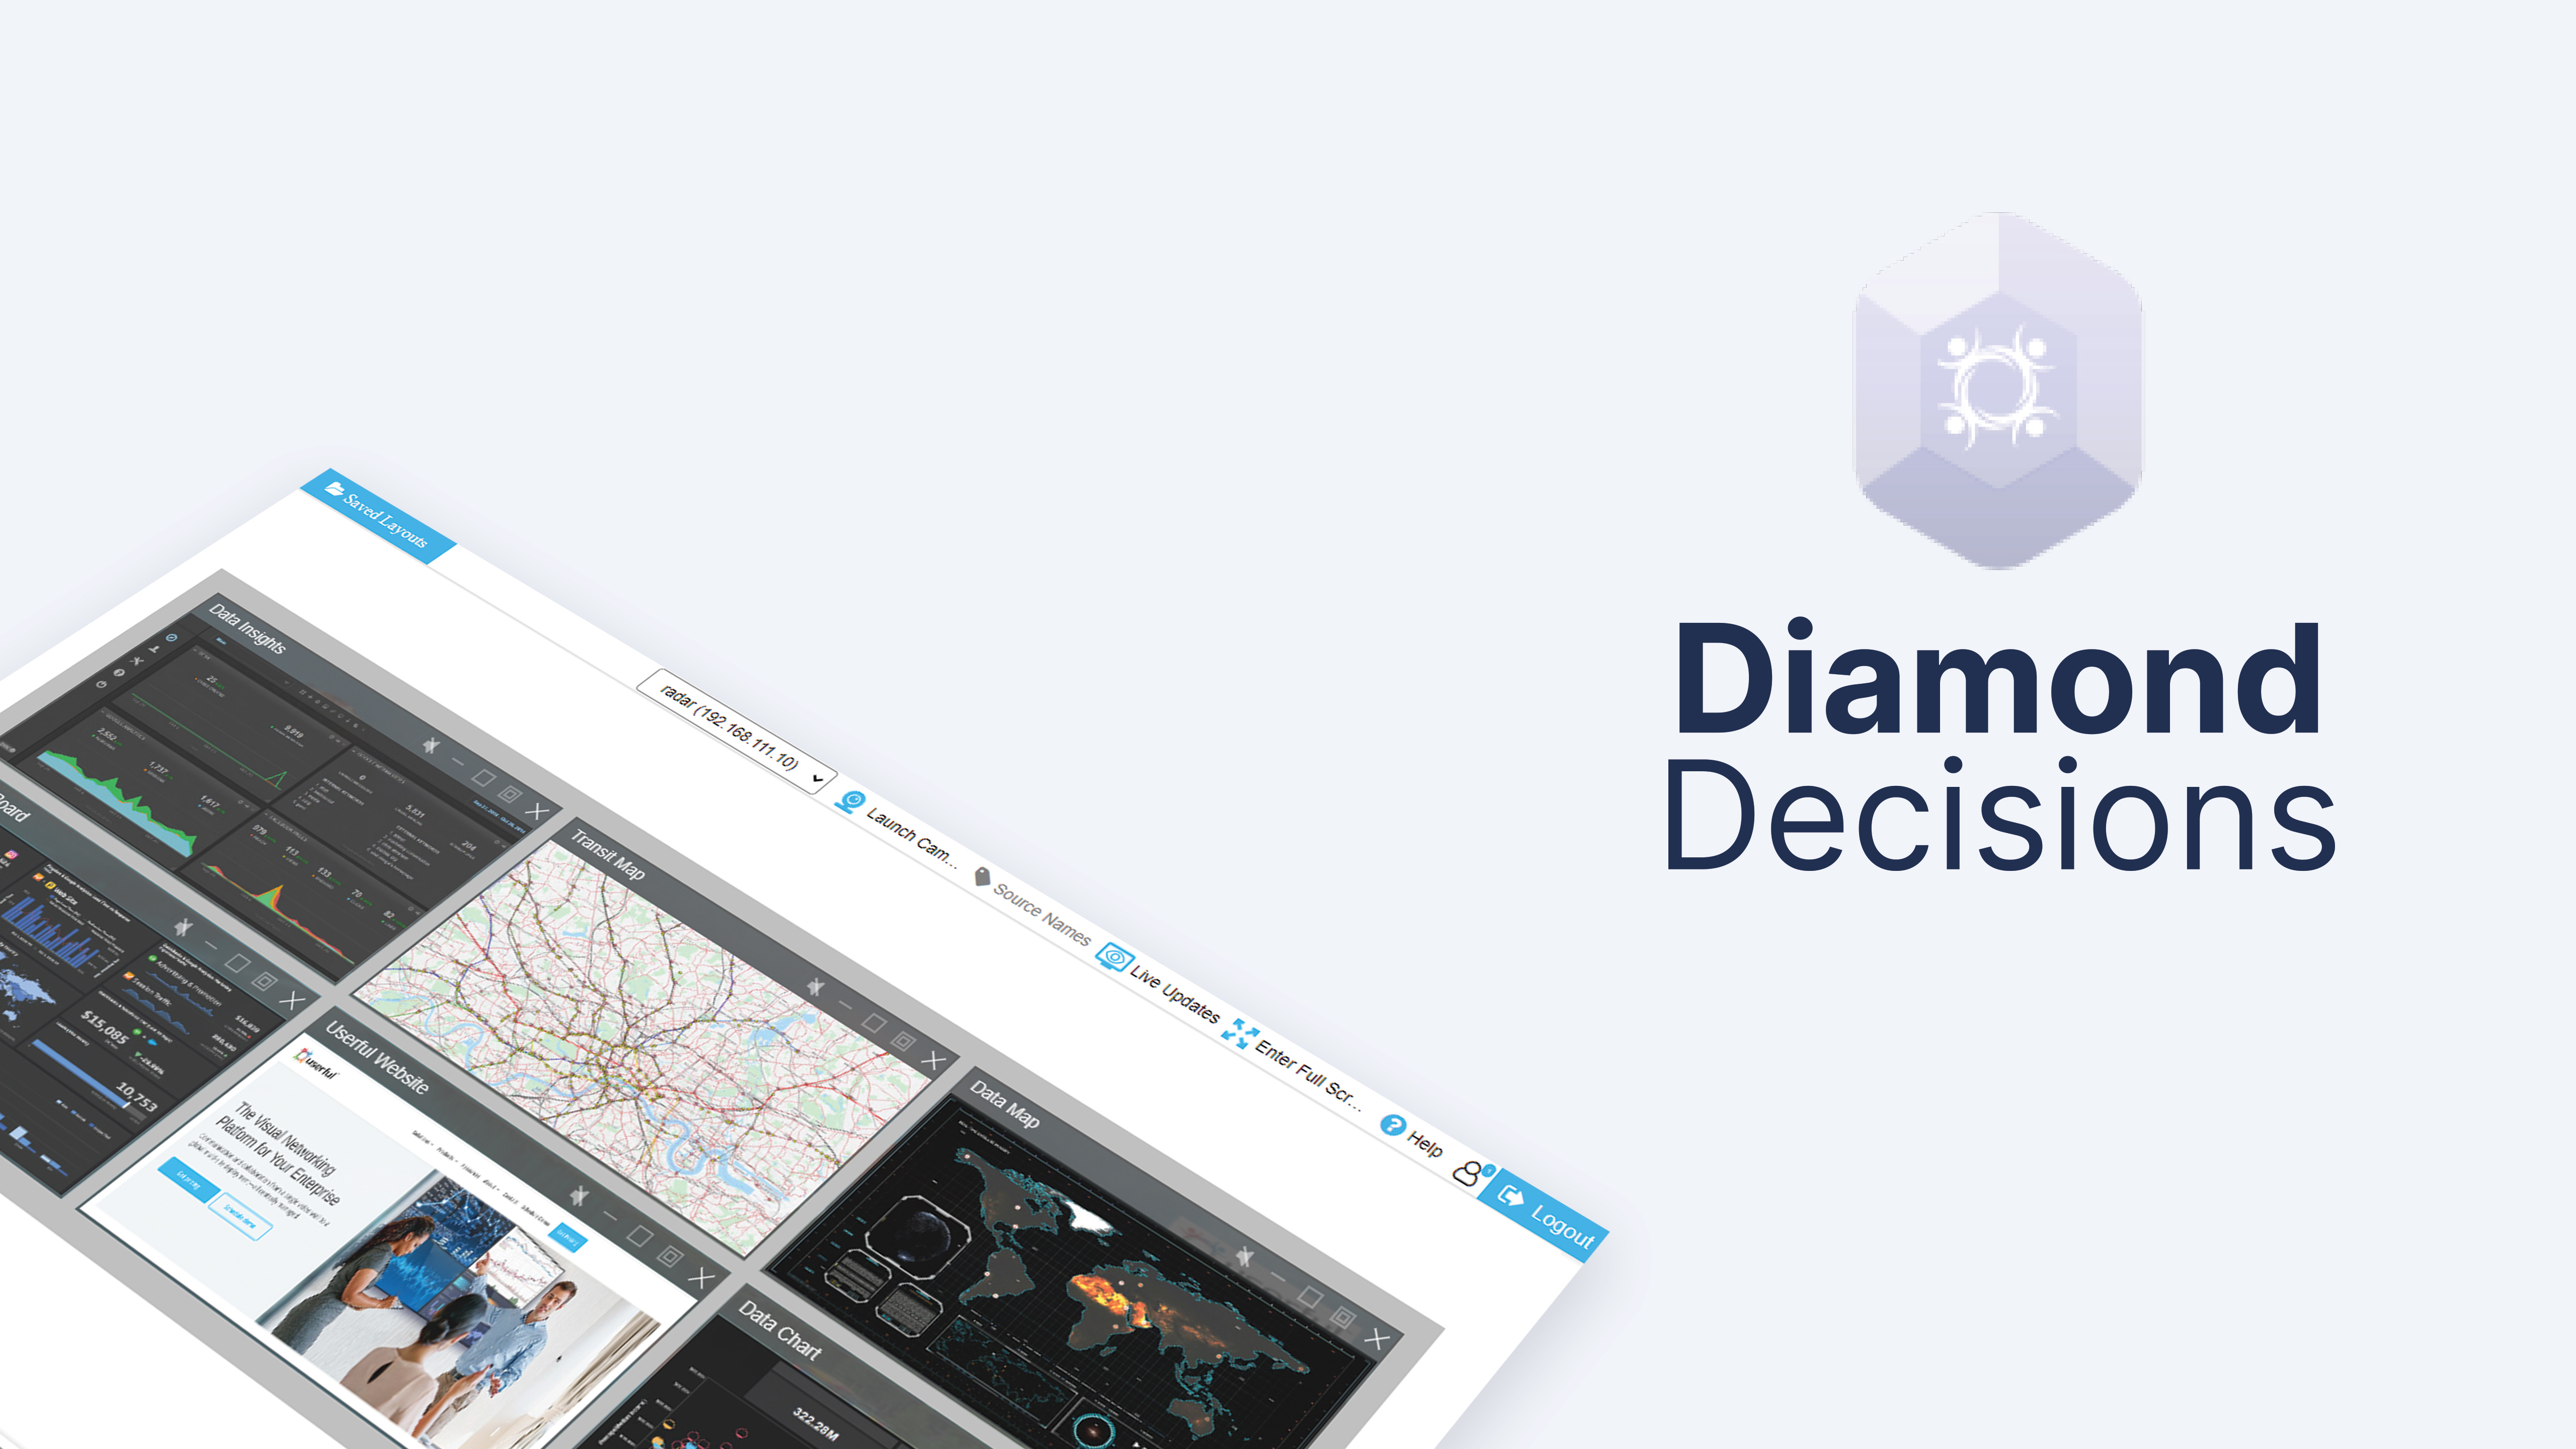 Visit our new Diamond Decisions page to learn more